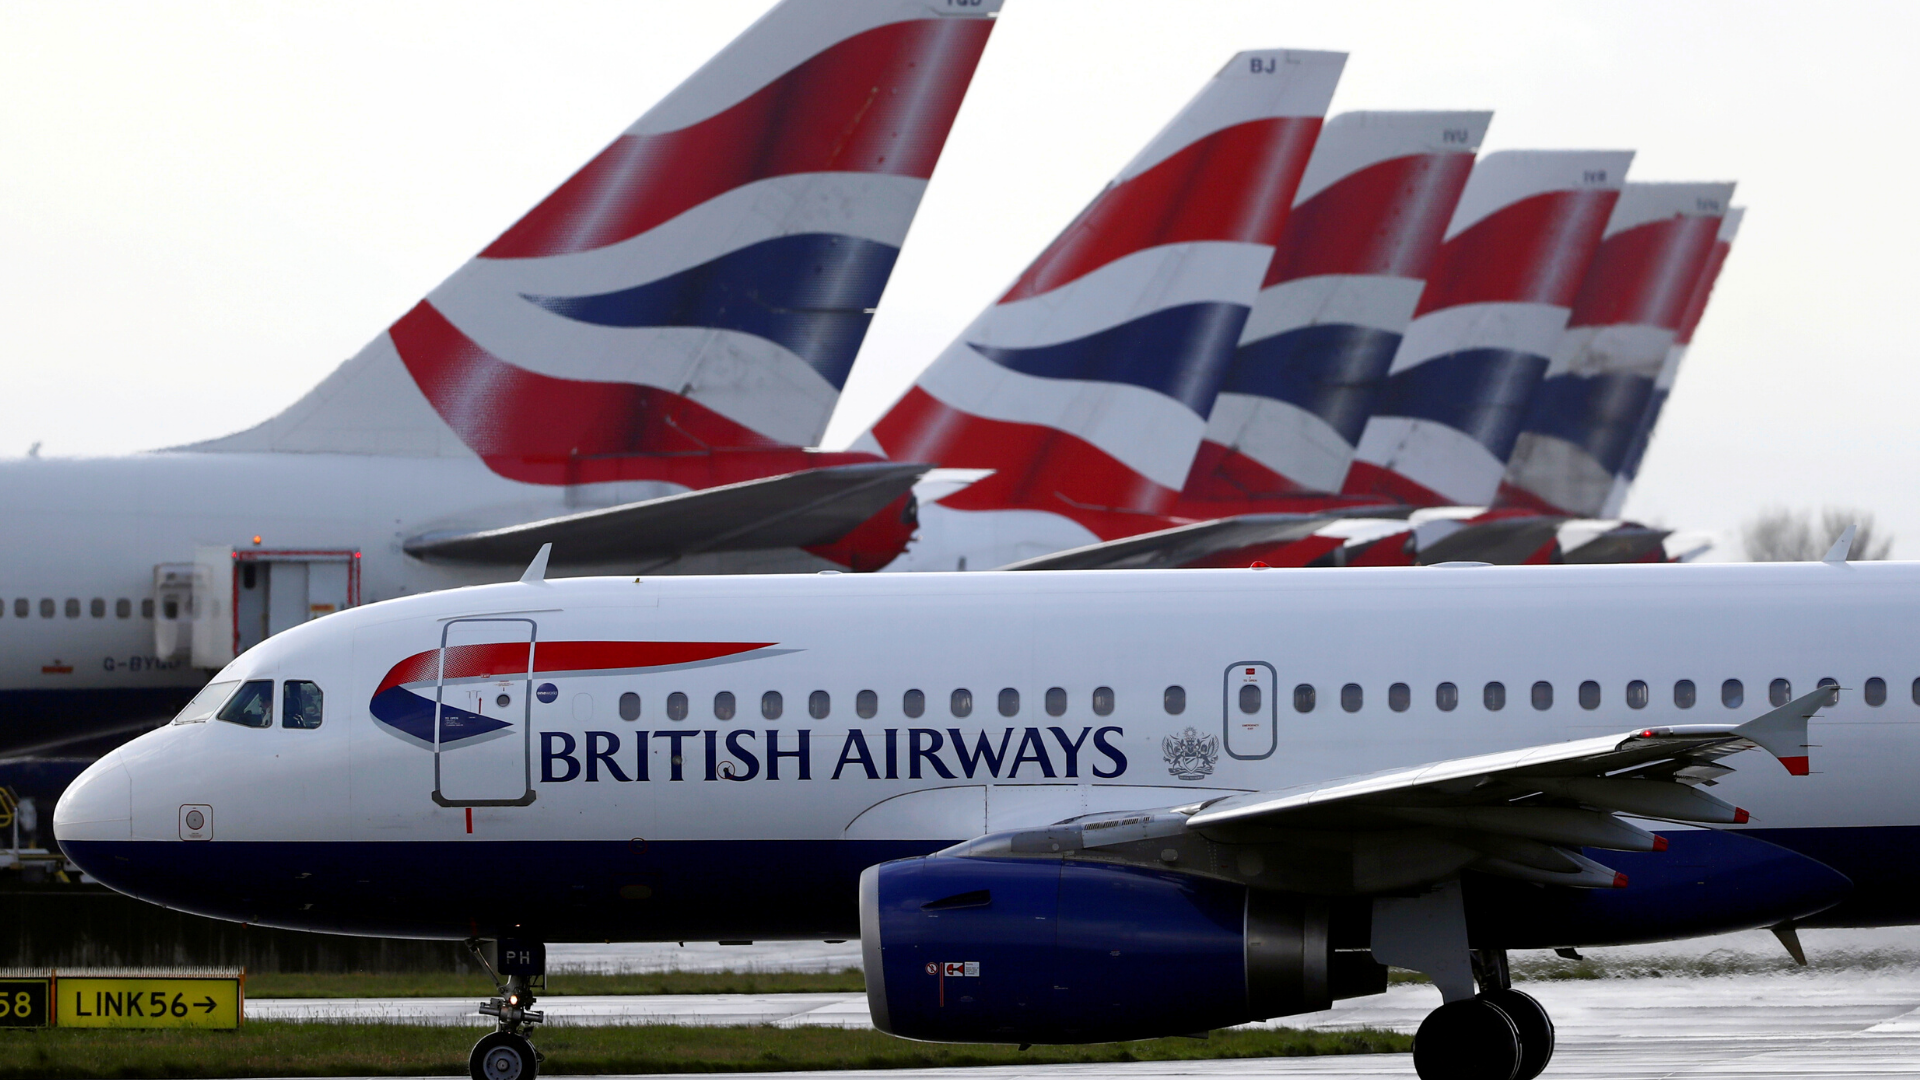 British Airways will use recruitment in Spain to save its operations.